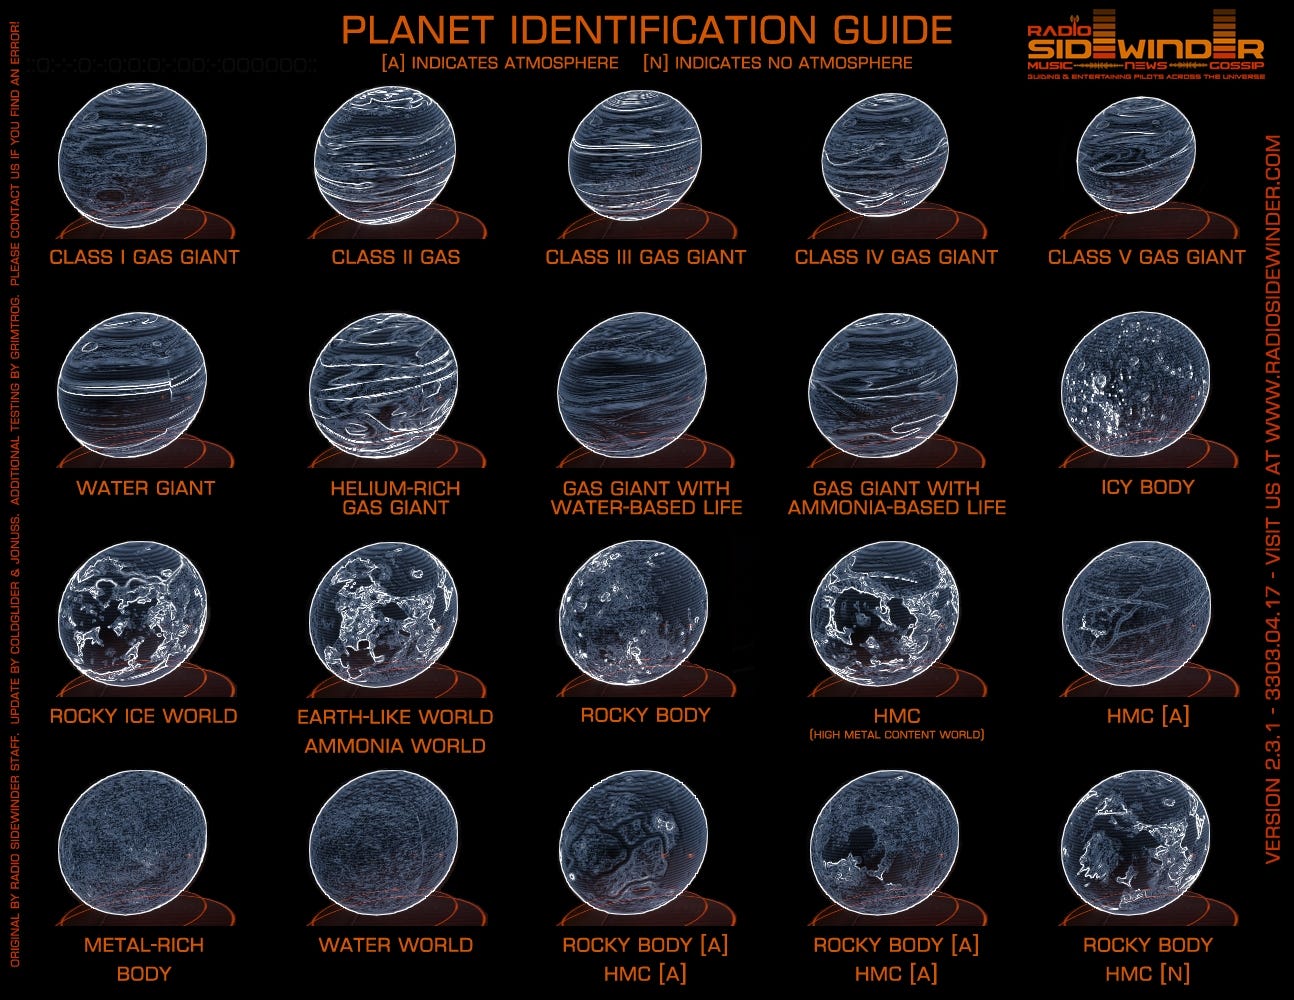 A beginner's guide to Elite Dangerous, by Alastaire Allday